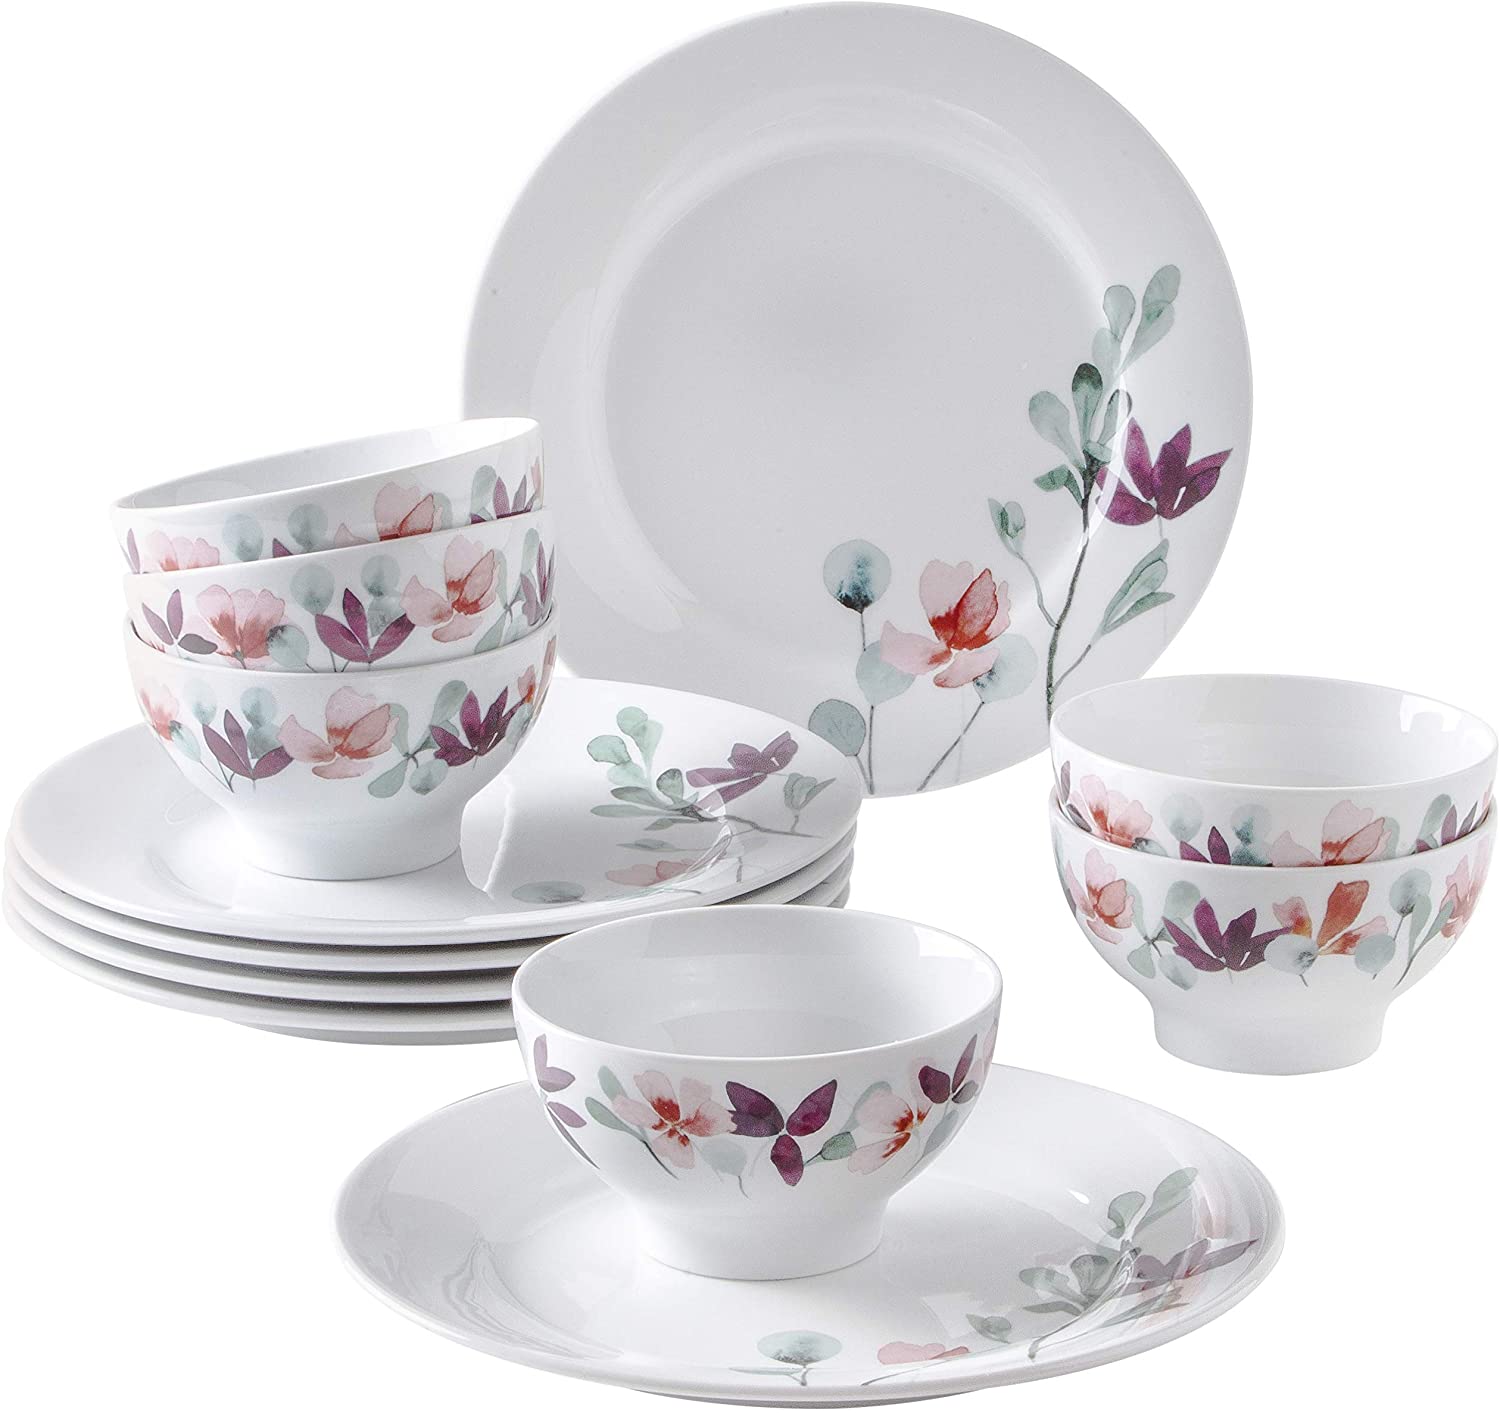 Kahla Heyday 57G237A50664C Plate Set 12 Pieces Floral Pattern for 6 People 6 Soup Bowls 6 Dinner Plates Crockery Set Porcelain Colourful with Flowers